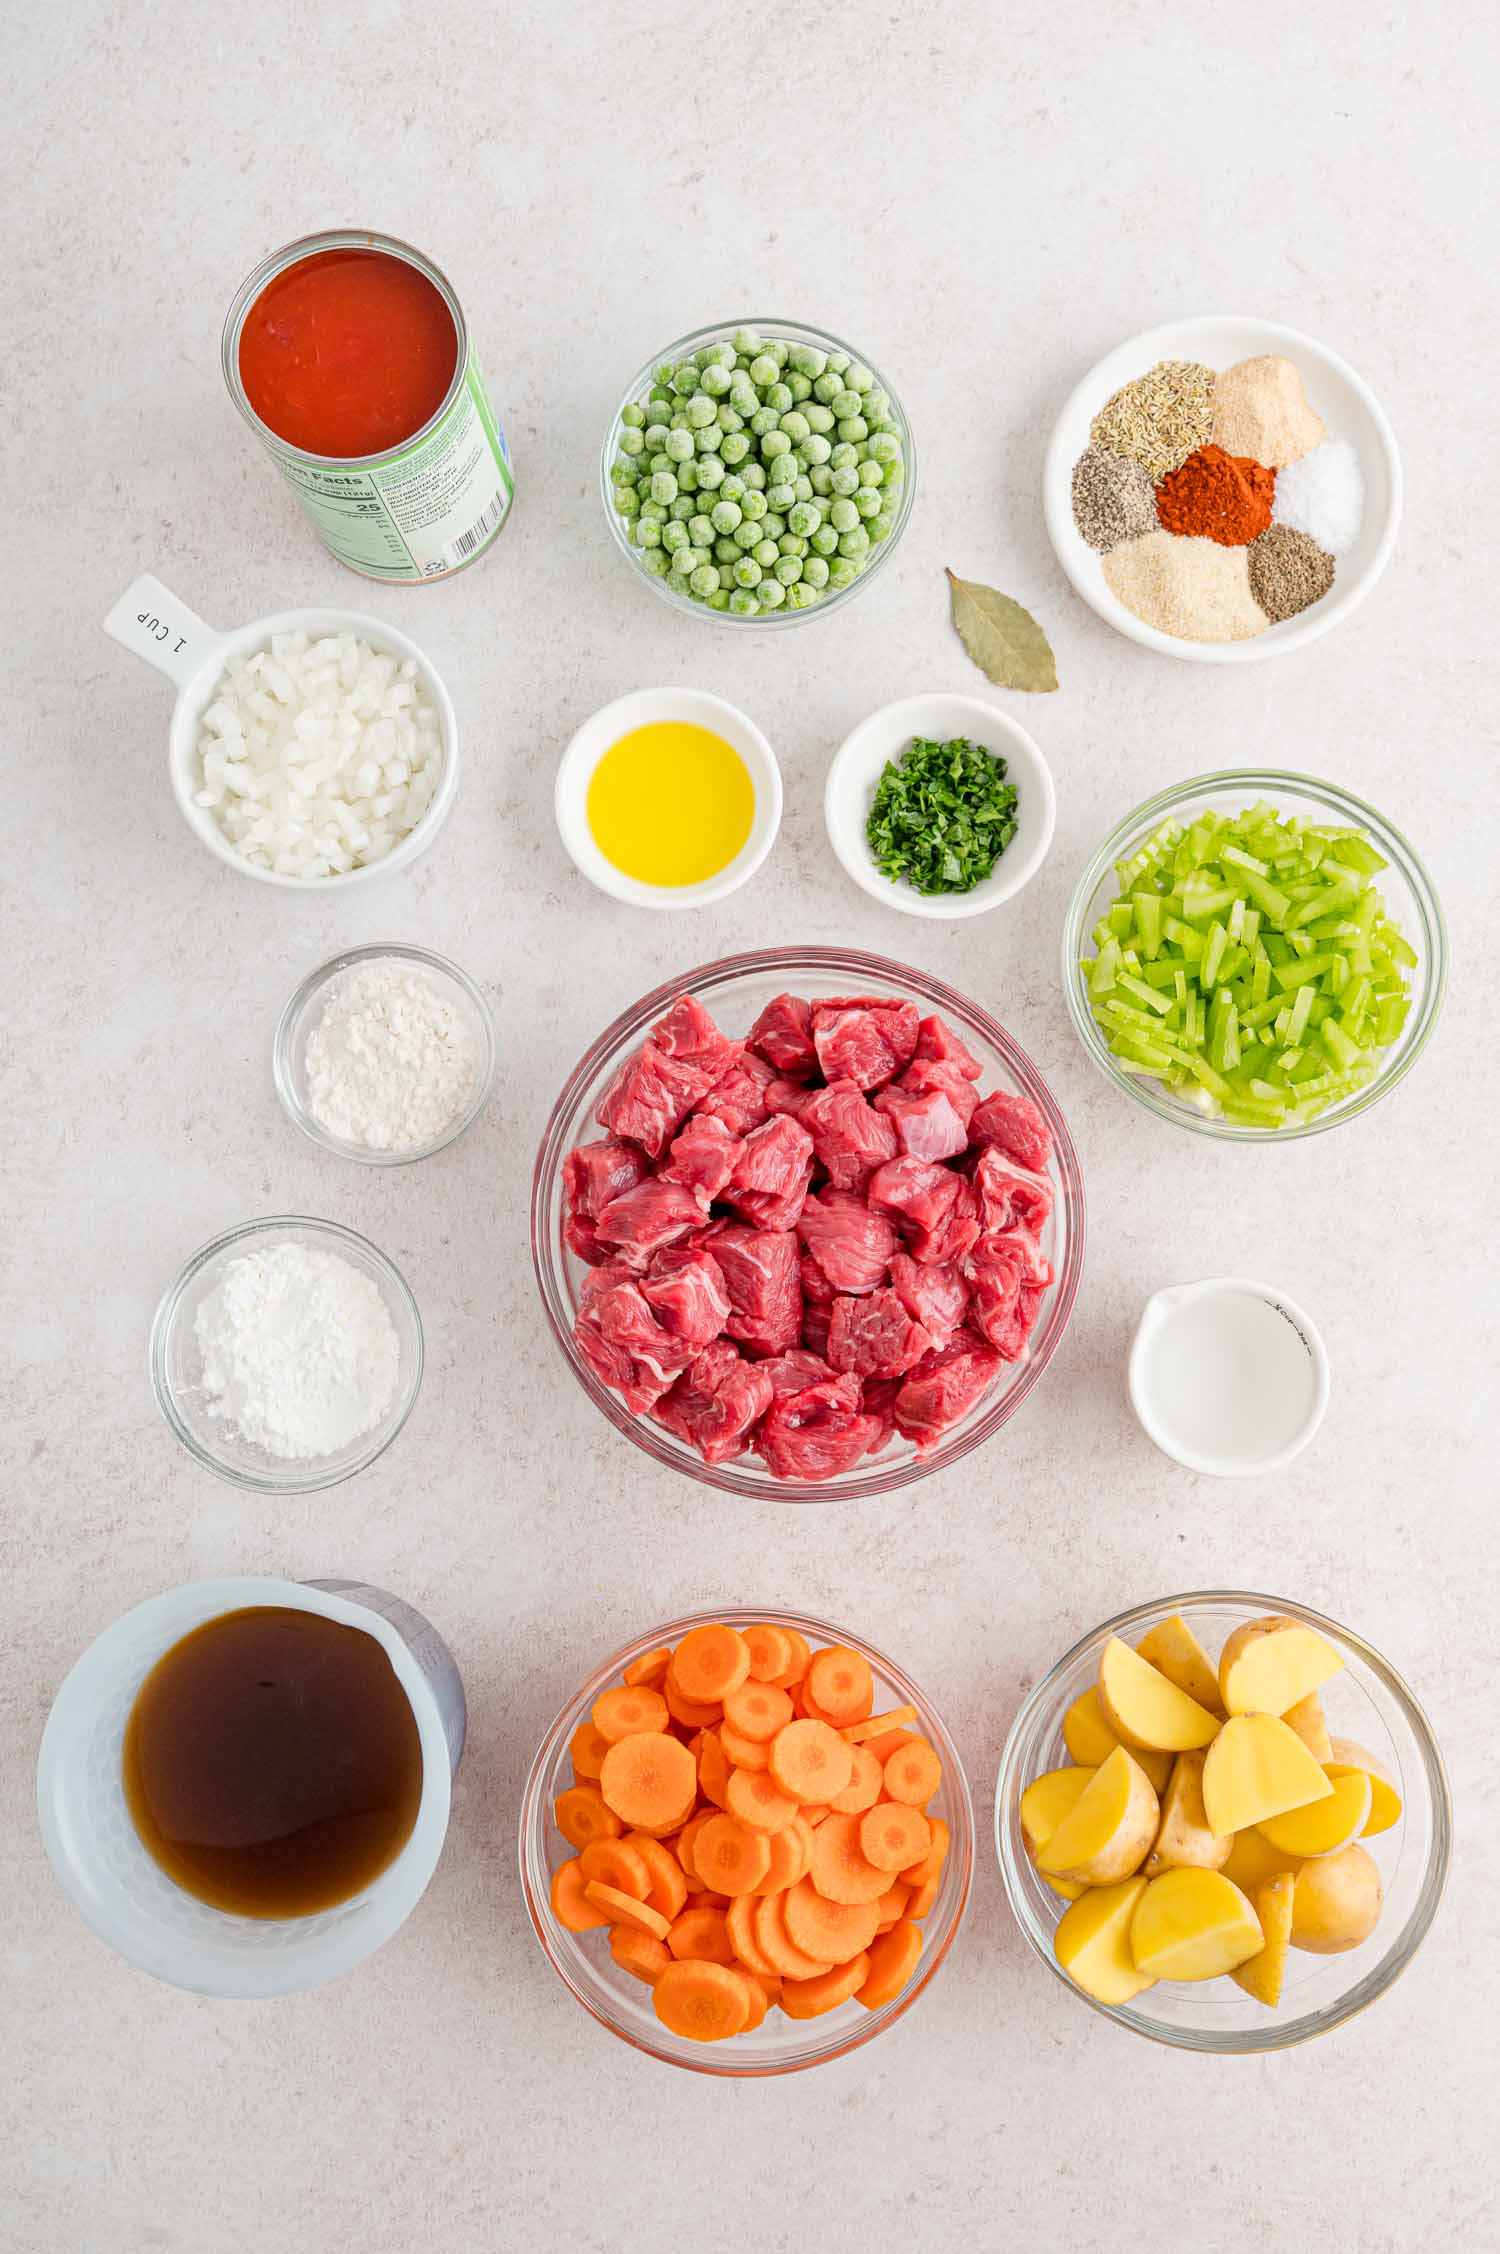 The ingredients for Instant Pot beef stew.